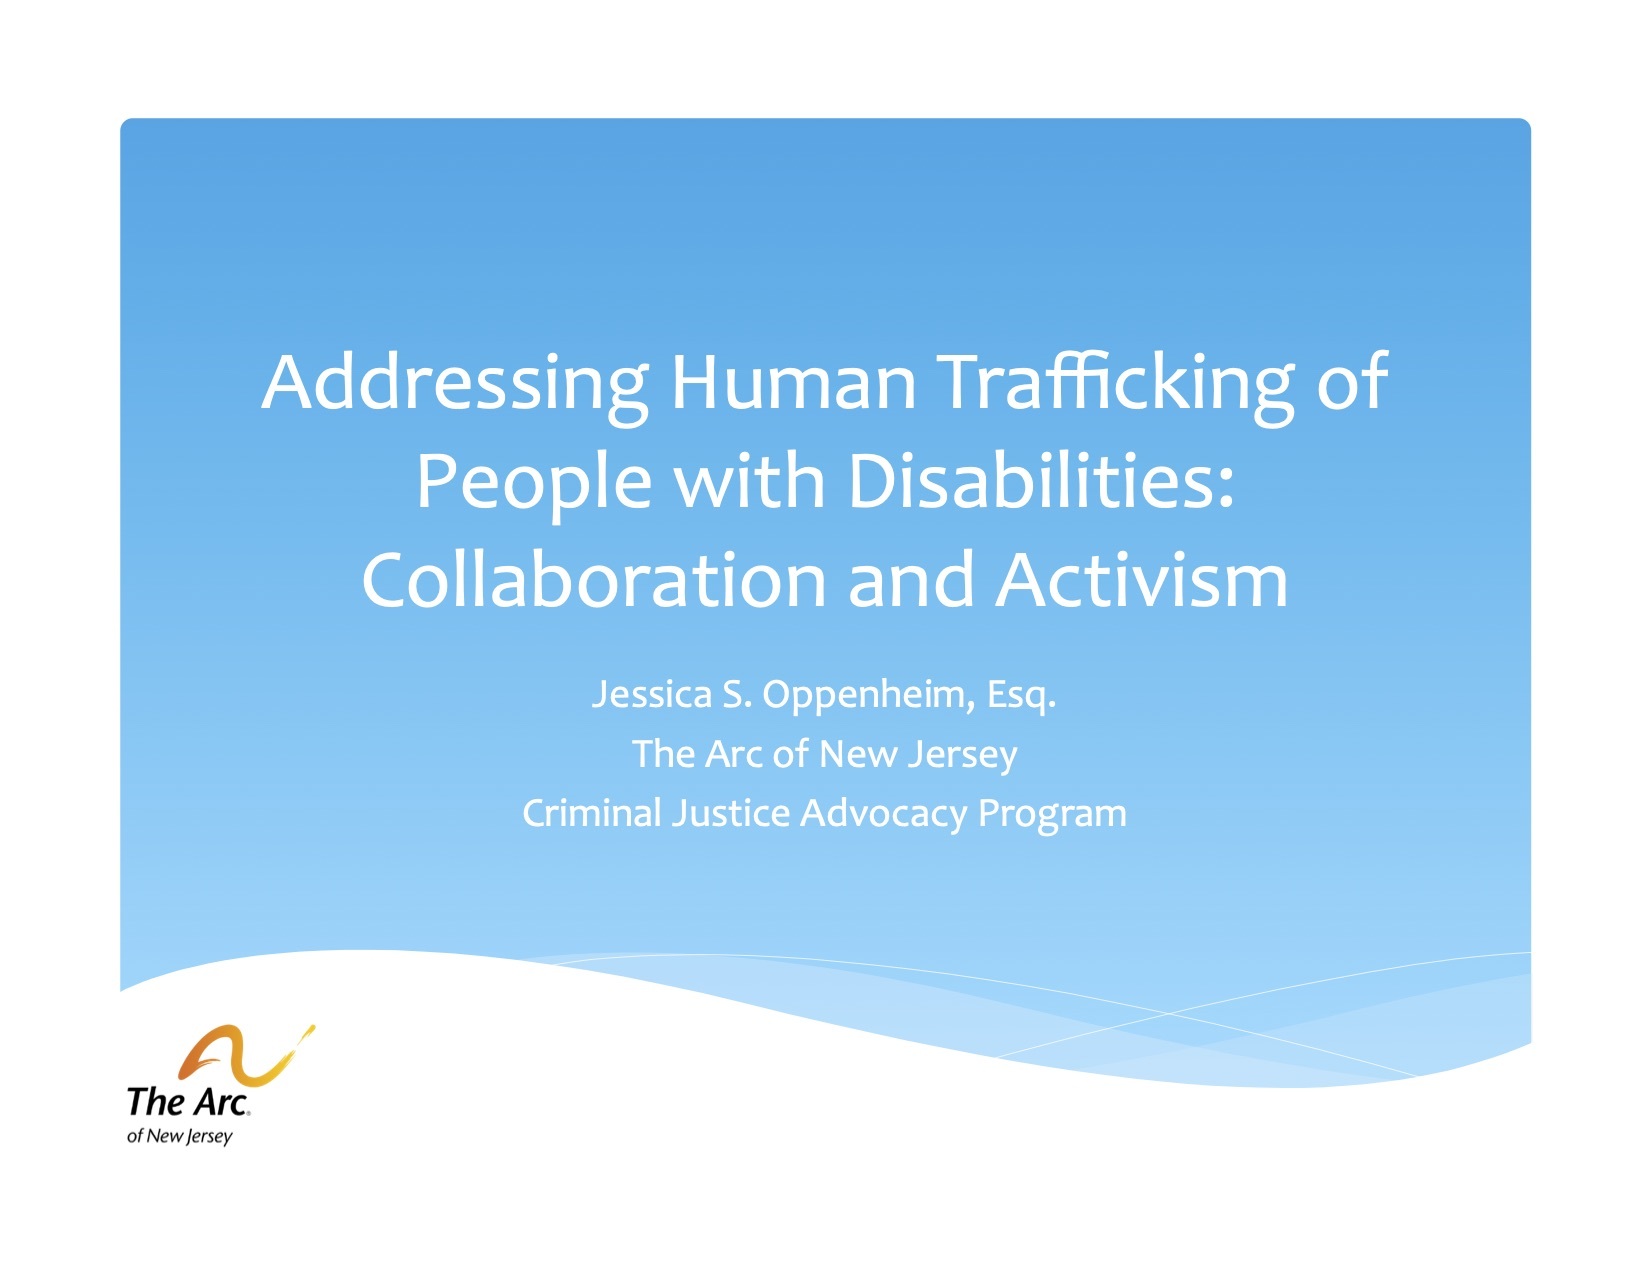 Human trafficking and disabilities report